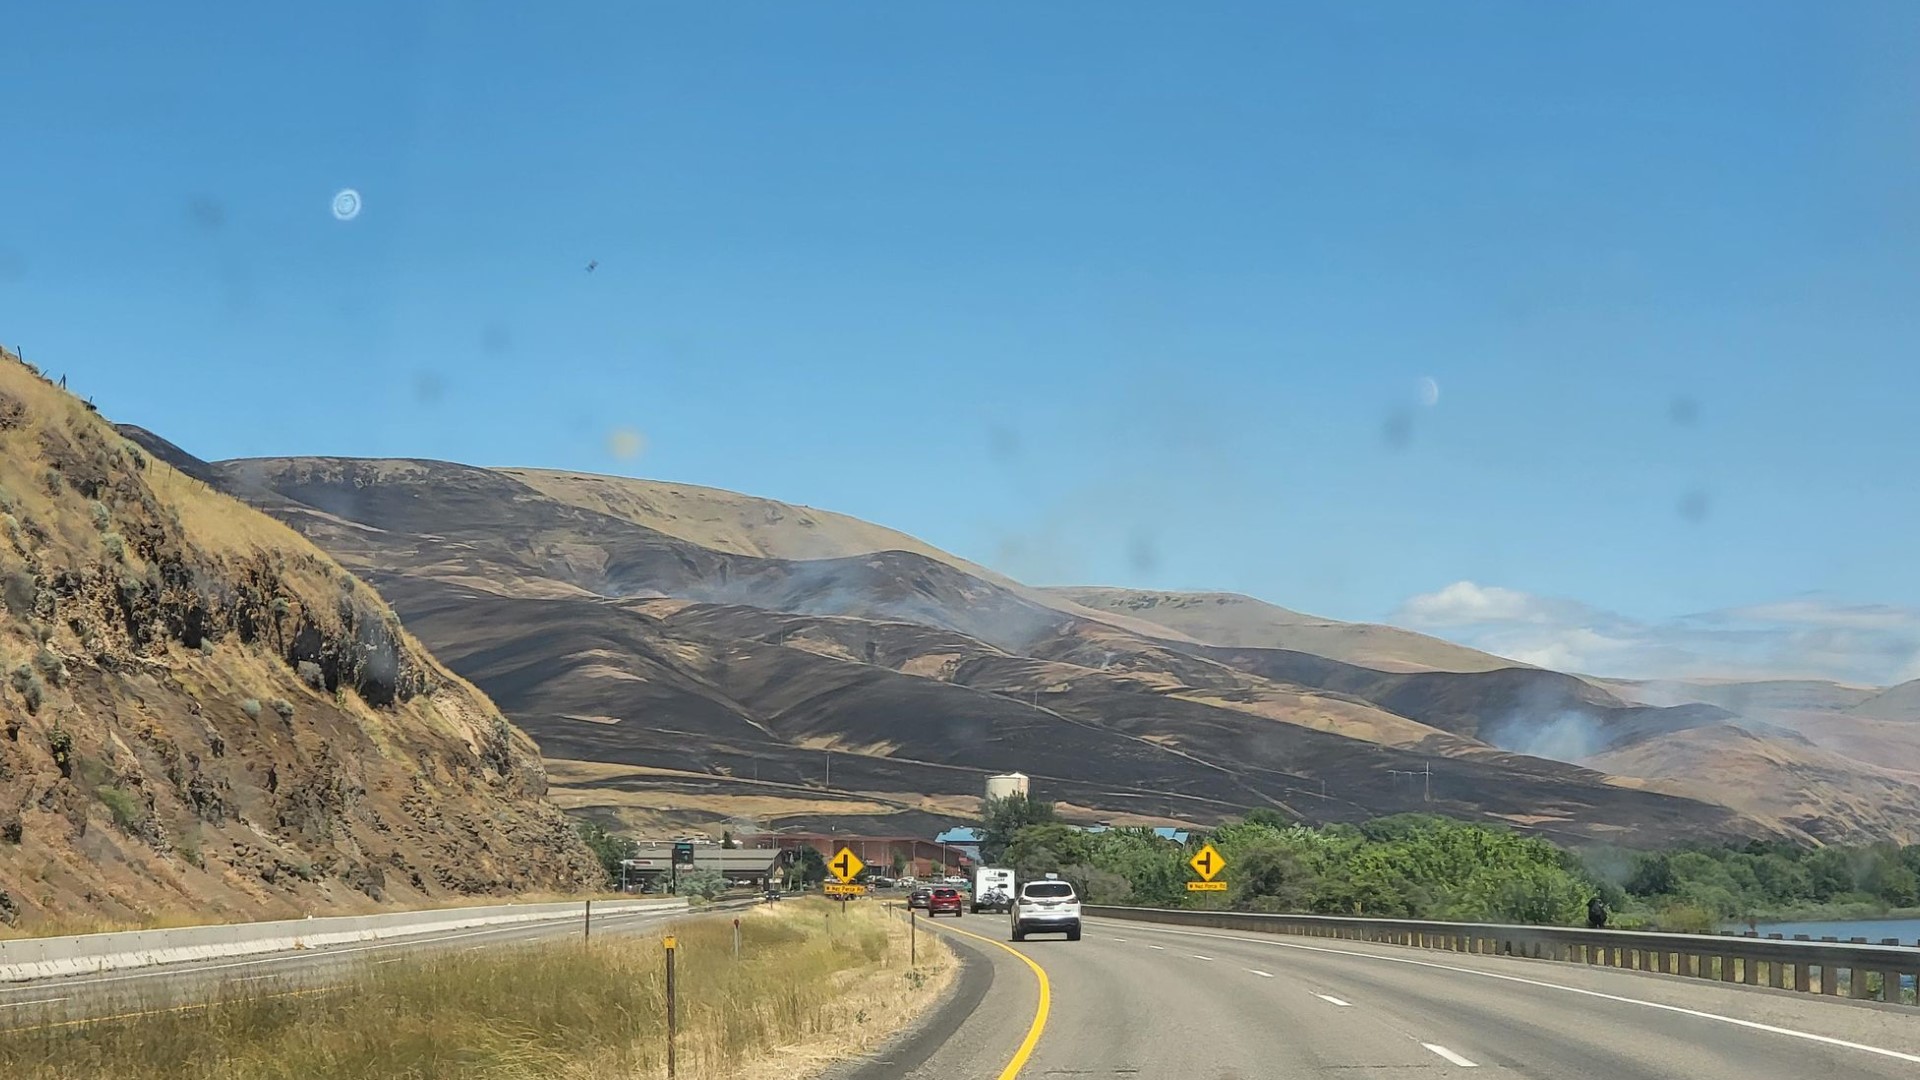 The Express fire started Sunday night north of US 95 near the Clearwater River and Clearwater River Casino & Lodge. It has burned at least 1,200 acres.